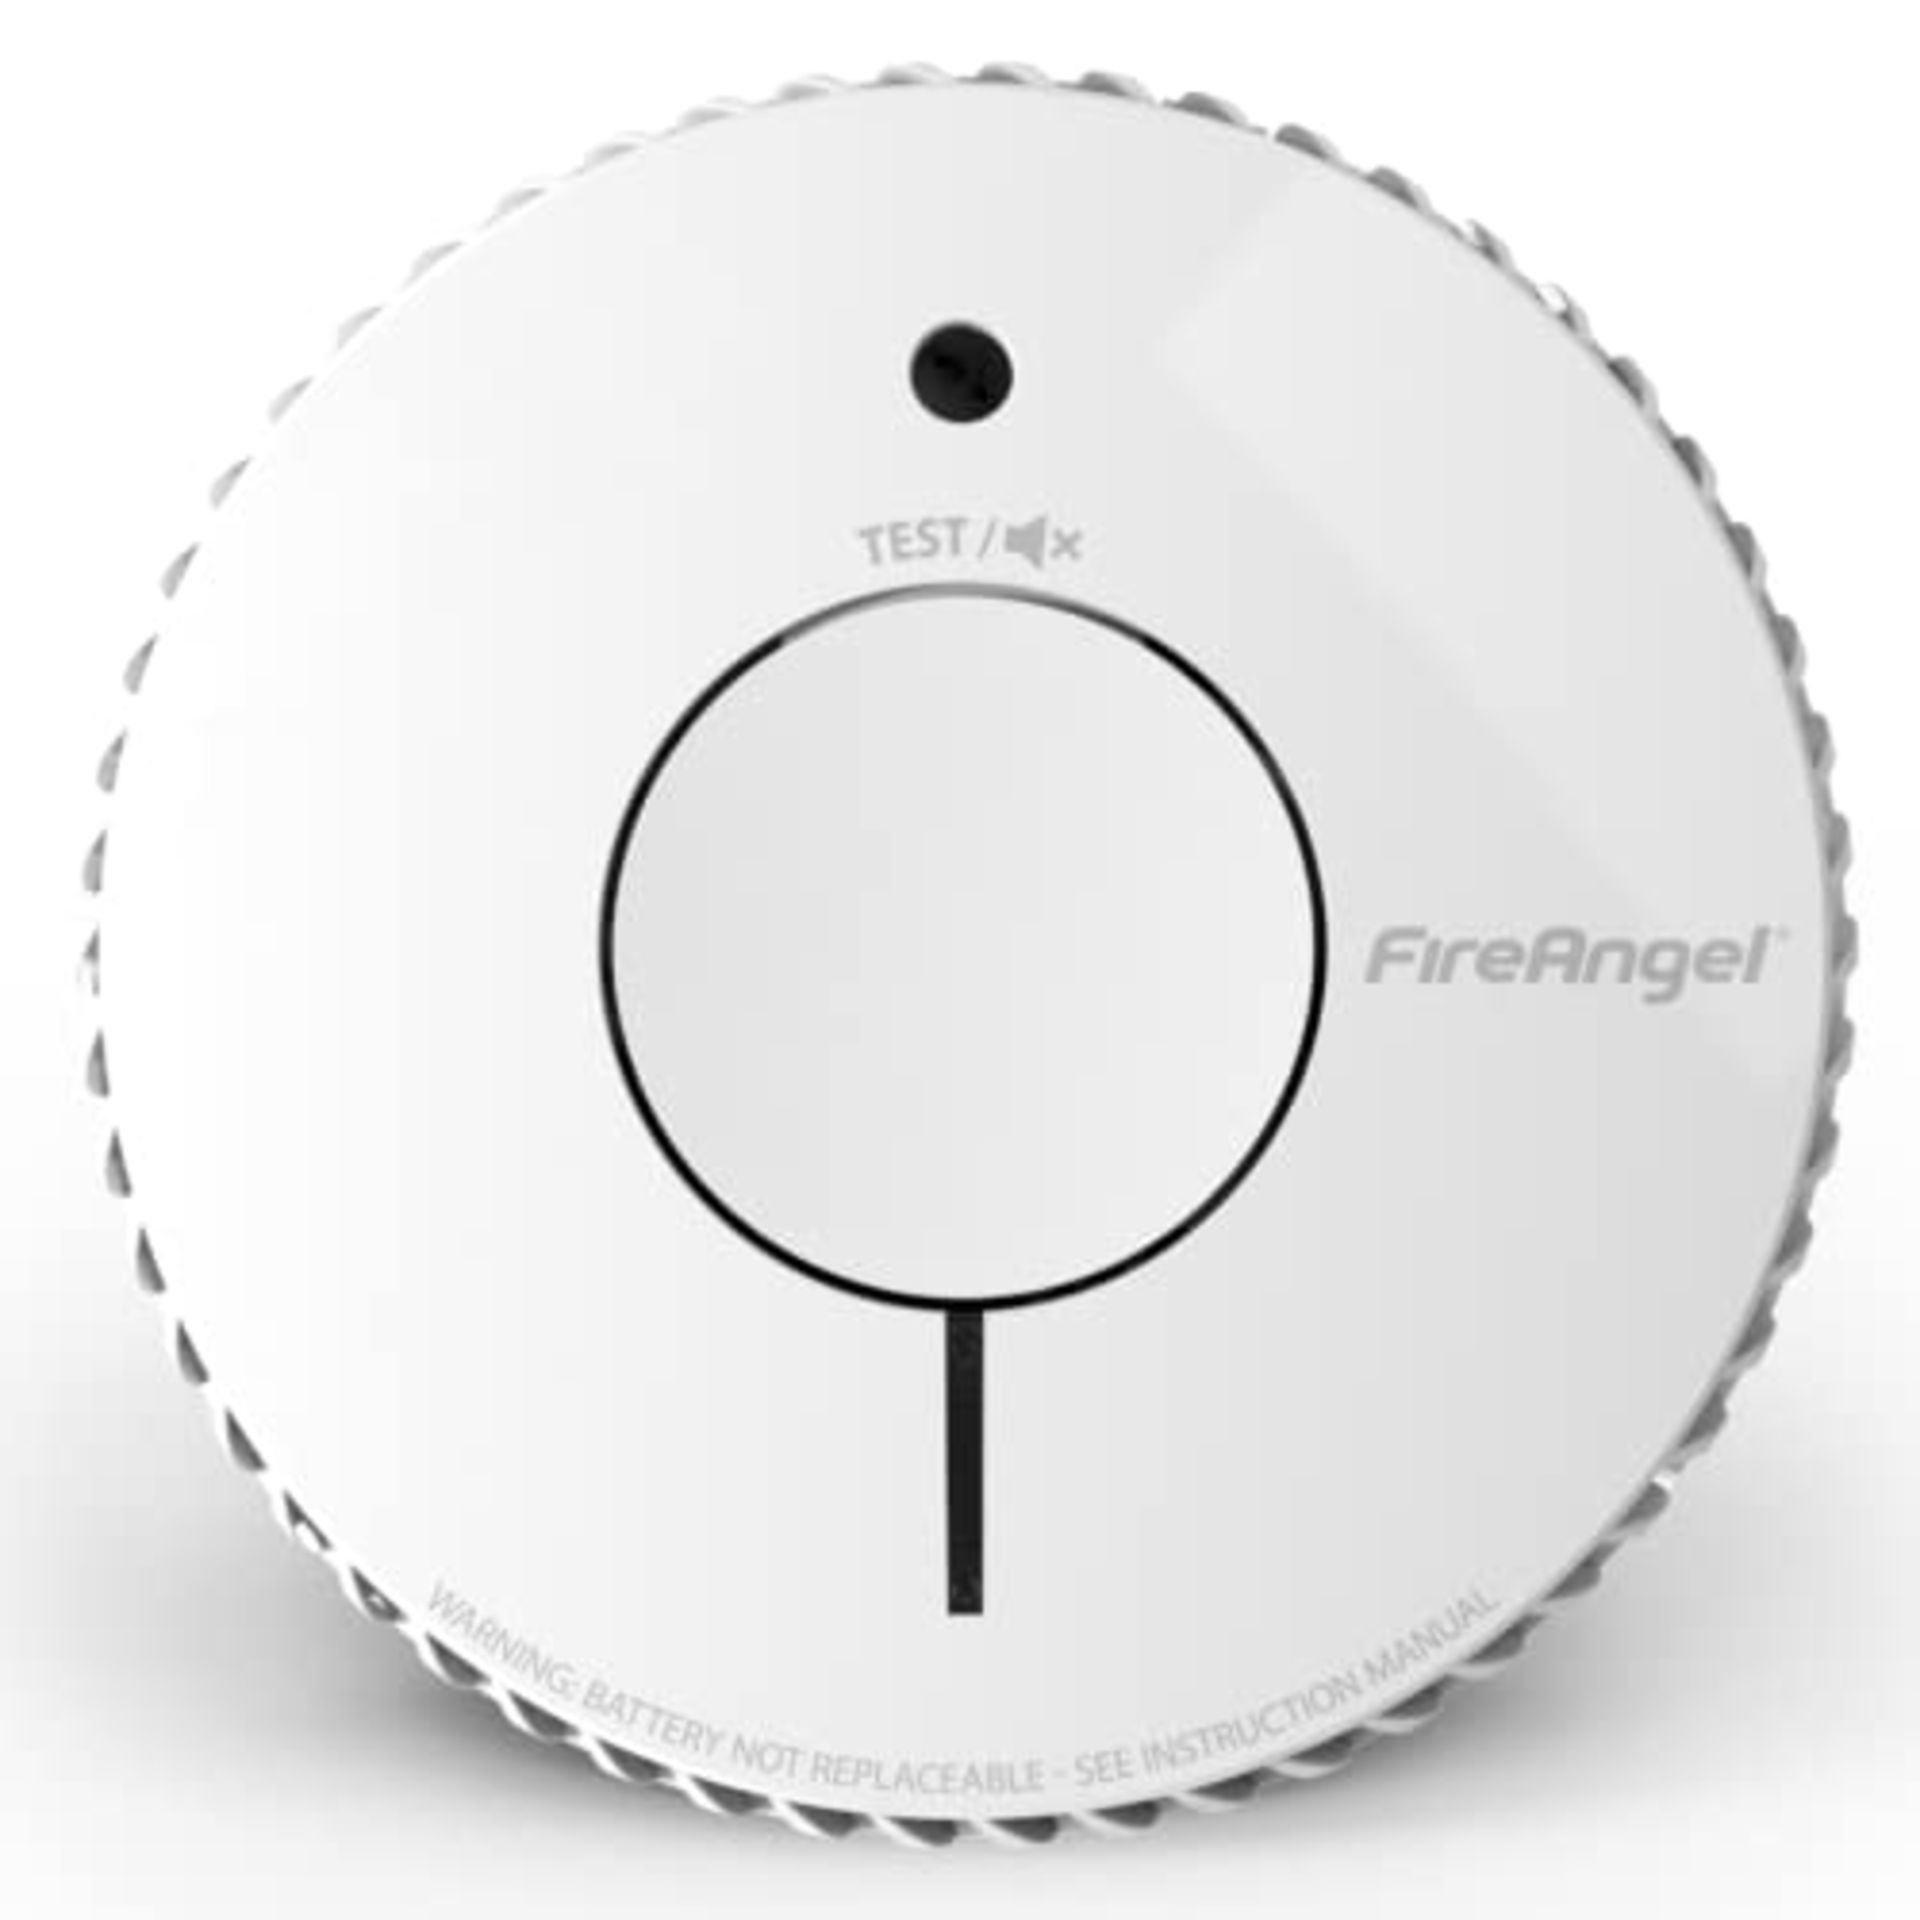 FireAngel Optical Smoke Alarm with 10 Year Sealed For Life Battery, FA6620-R (ST-622 /